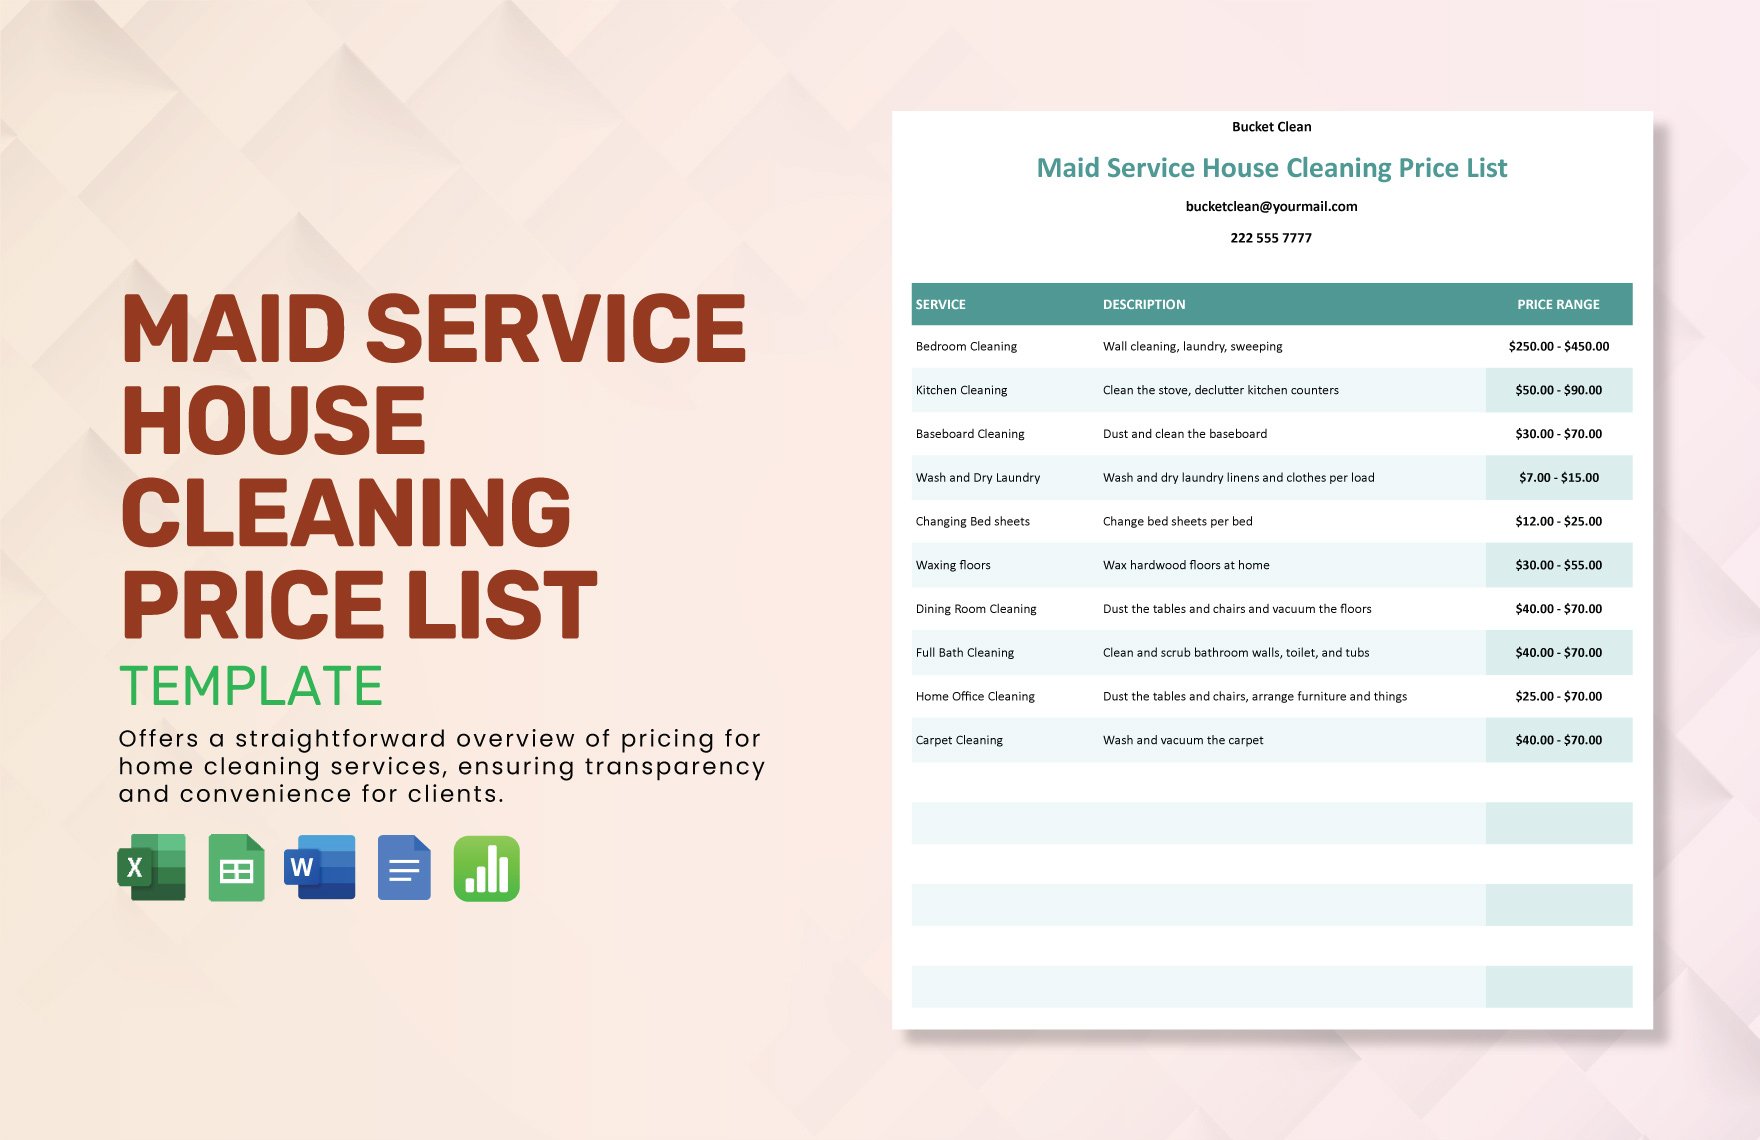 Maid Service House Cleaning Price List Template